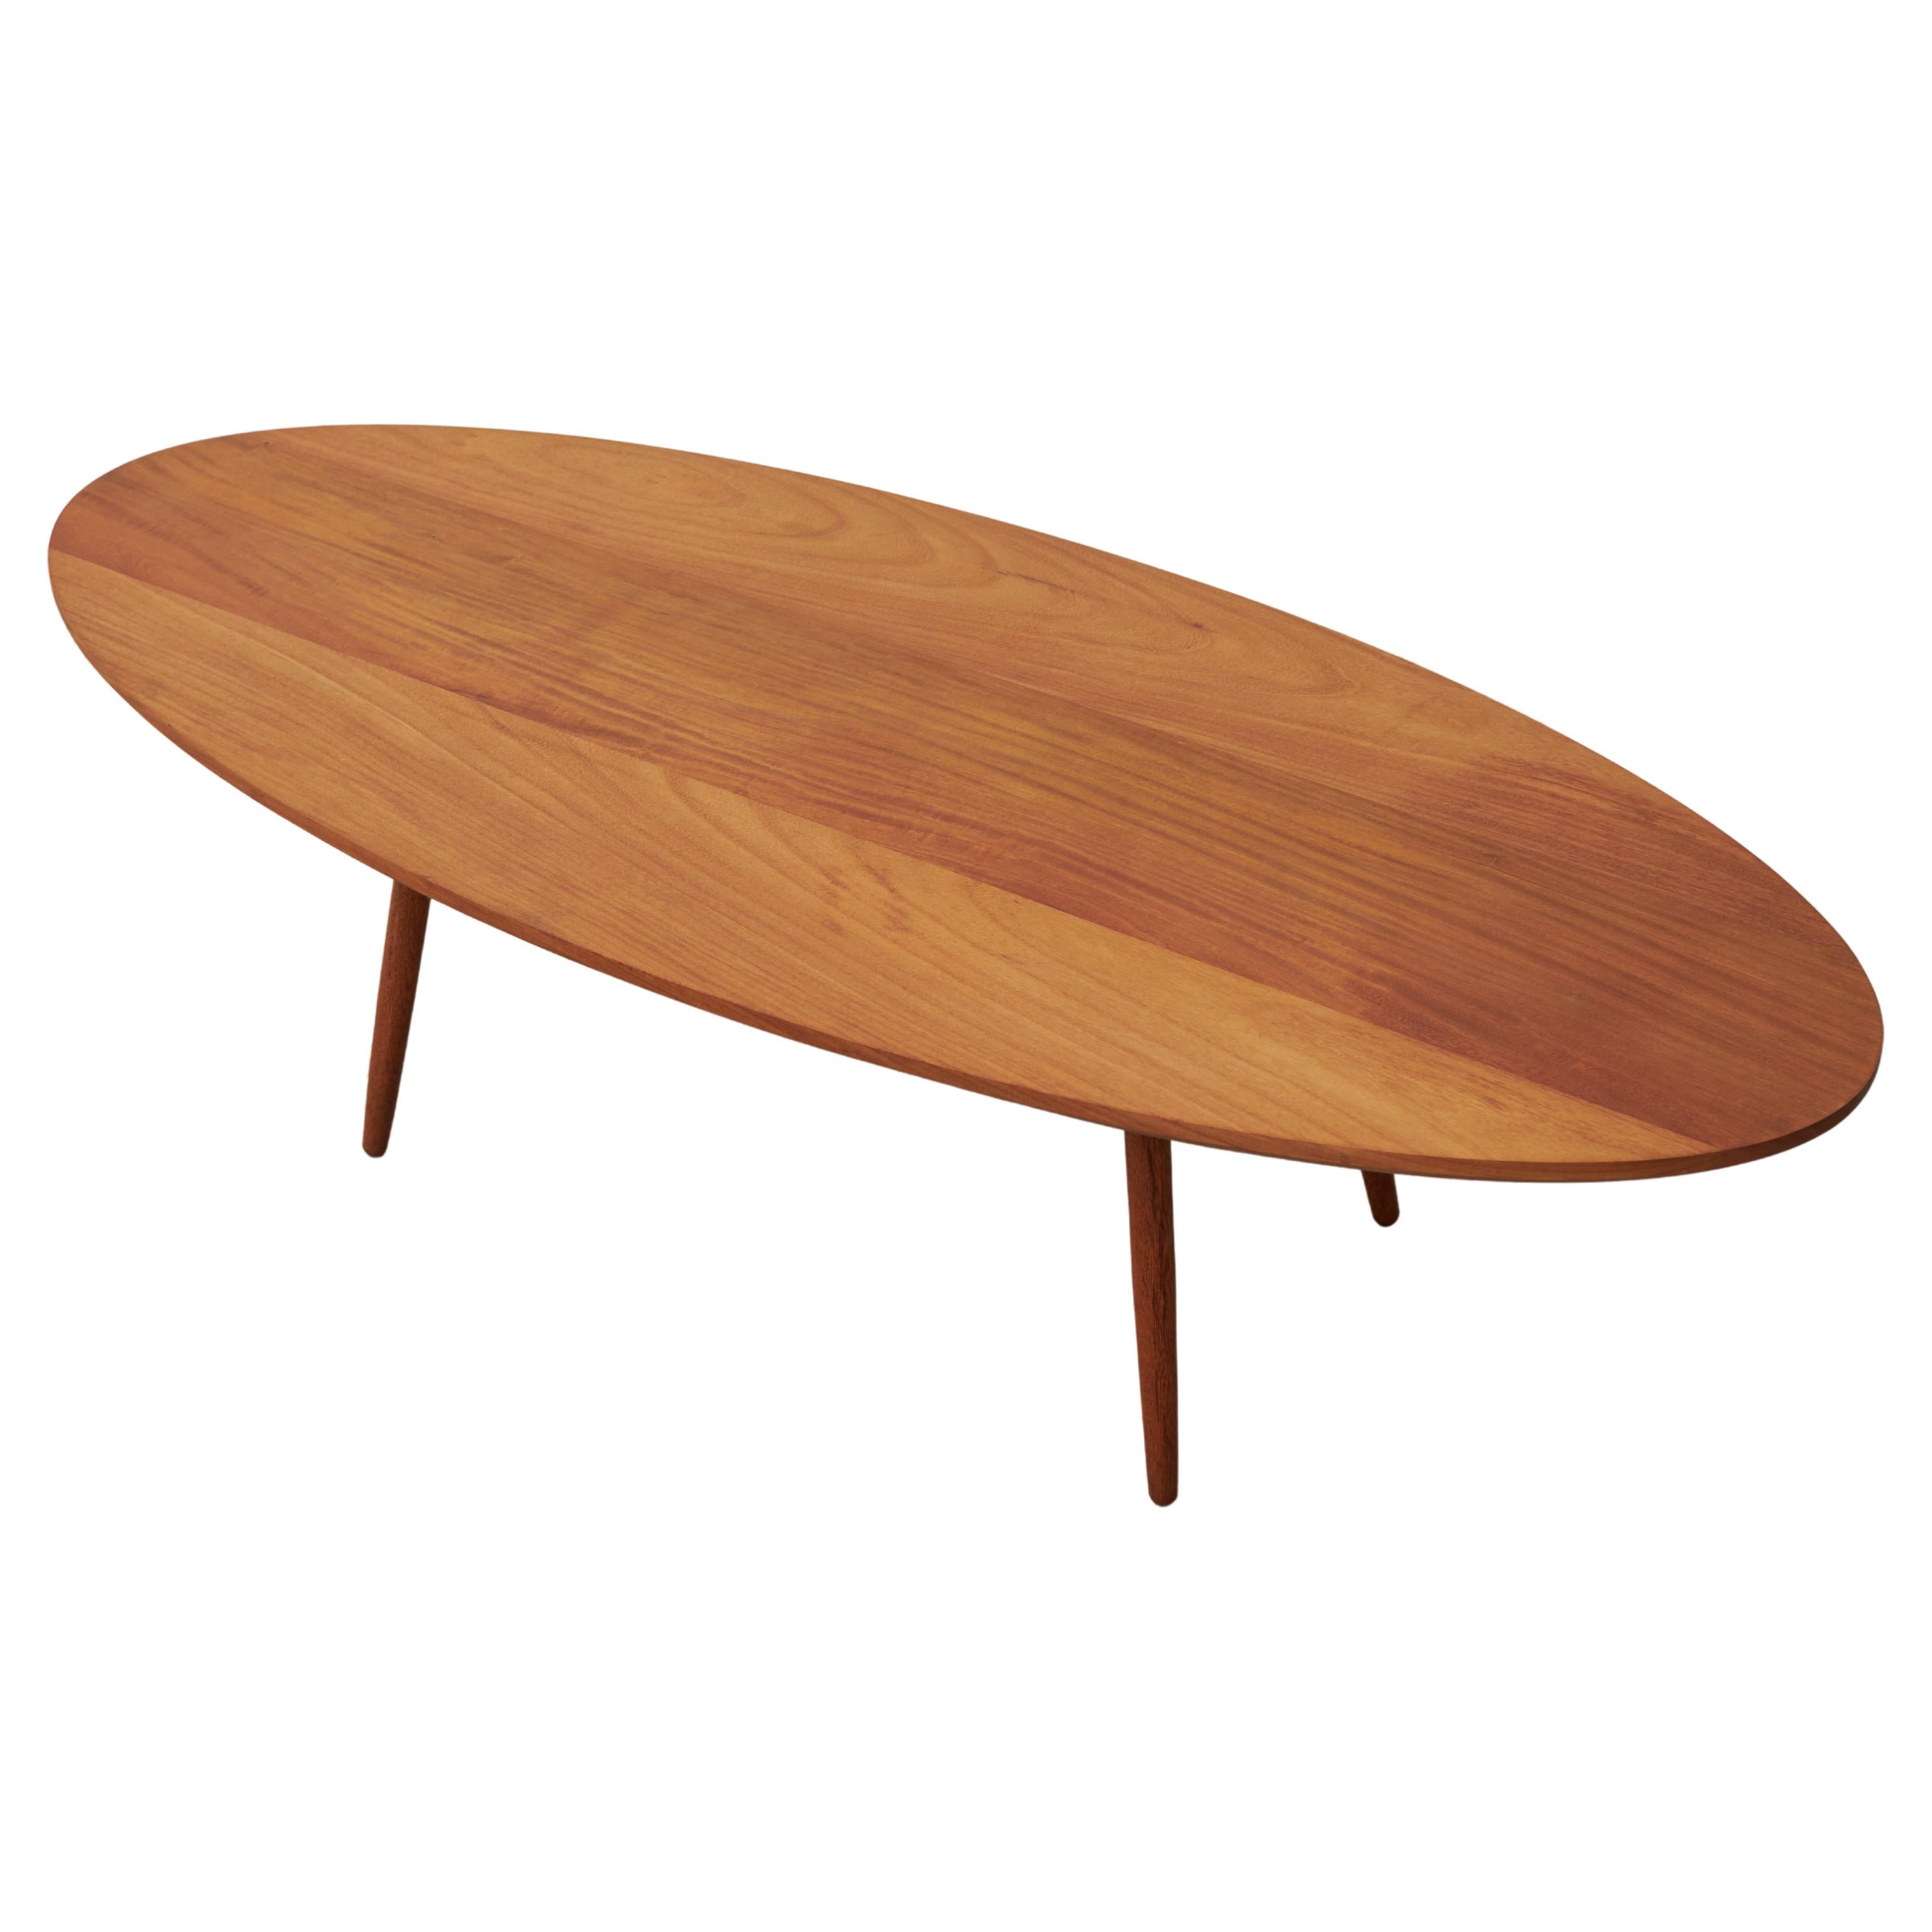 Woodwork 'Banquisa' Cofee Table - Brazilian design by André Bianco For Sale